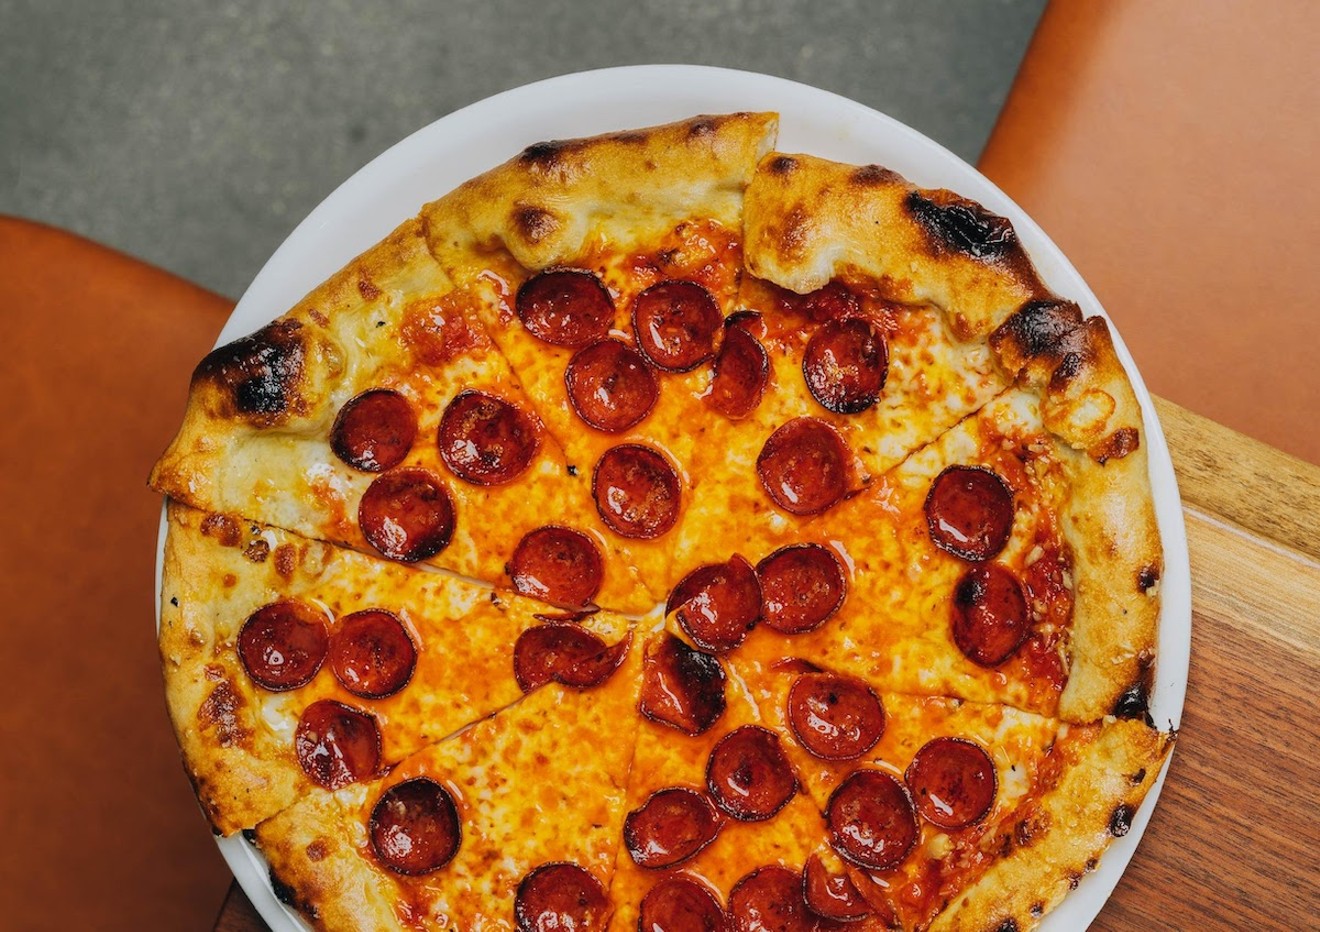 A honey and pepperoni pizza from Barbakoa by Finka at the Doral Yard.